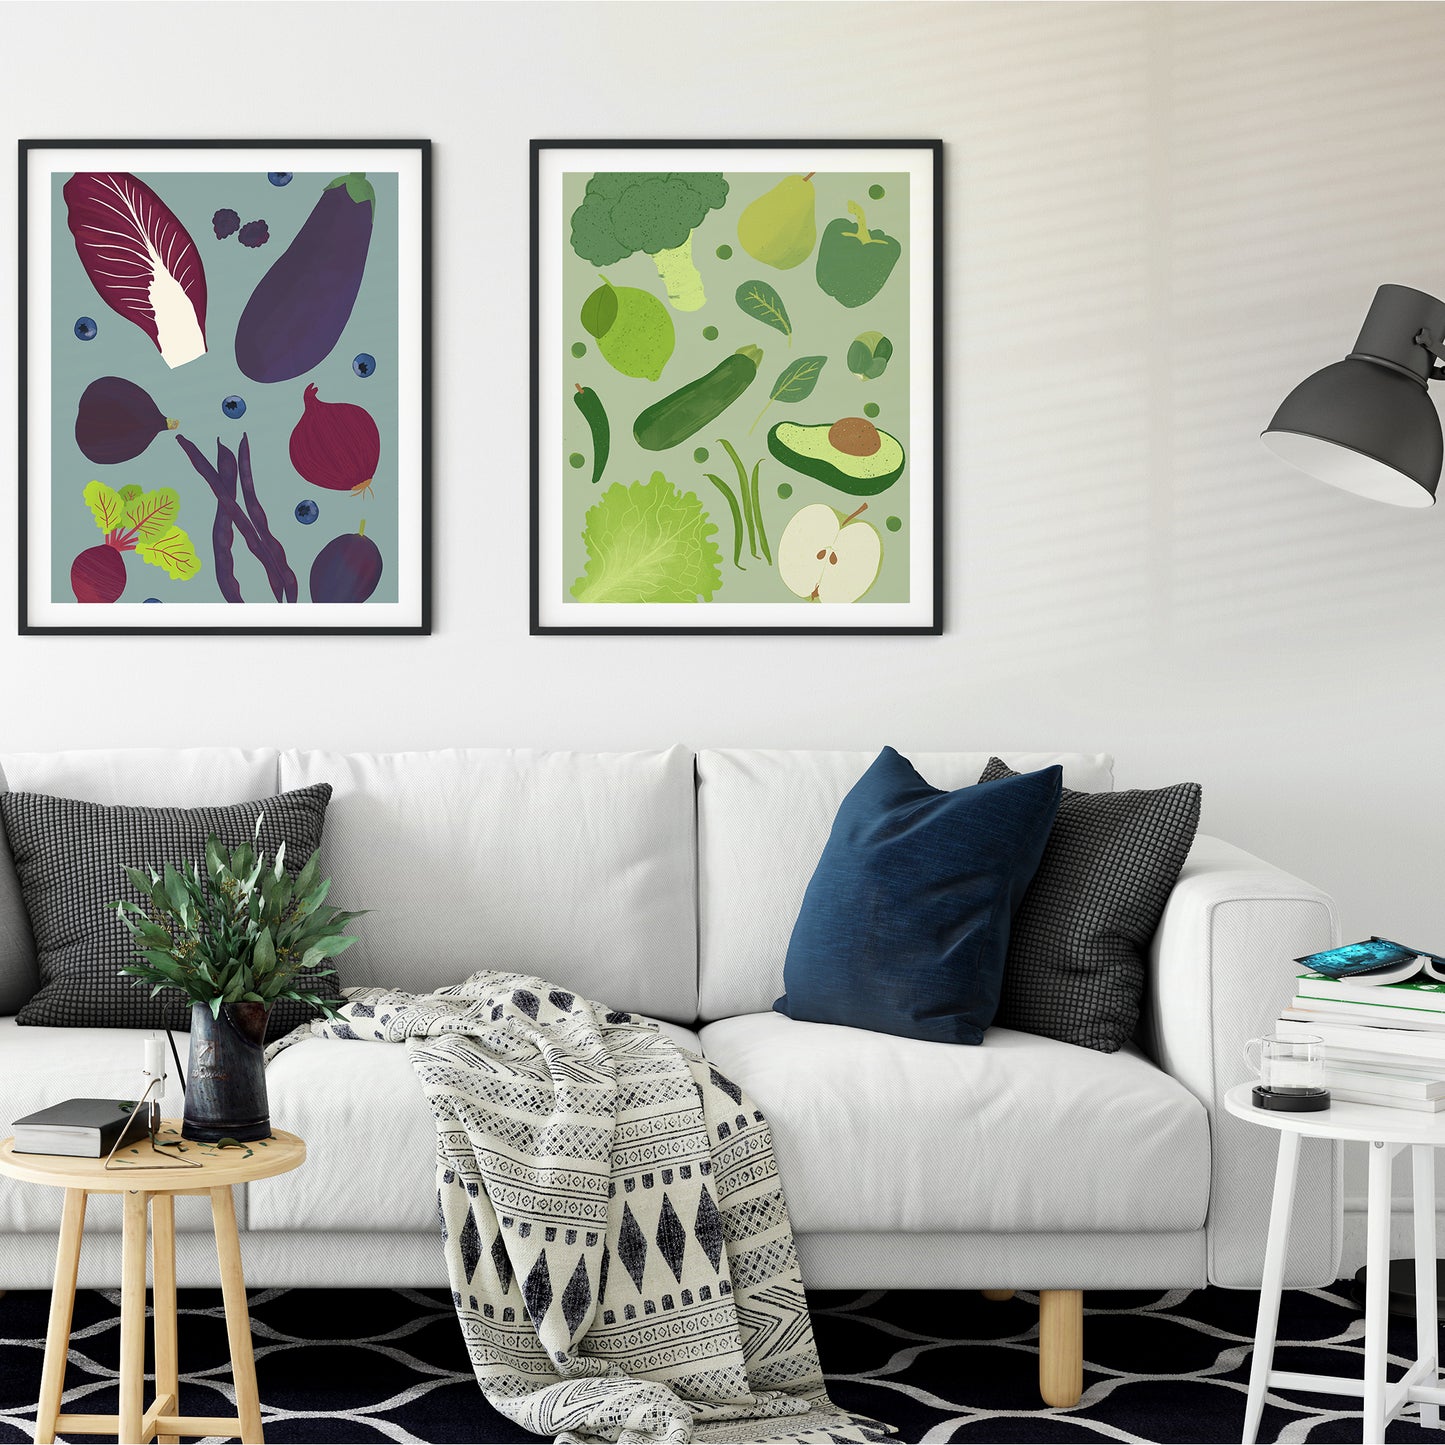 Image of two framed art prints of purple fruit and vegetables on a pale indigo background and green fruits and veg on a pale green background